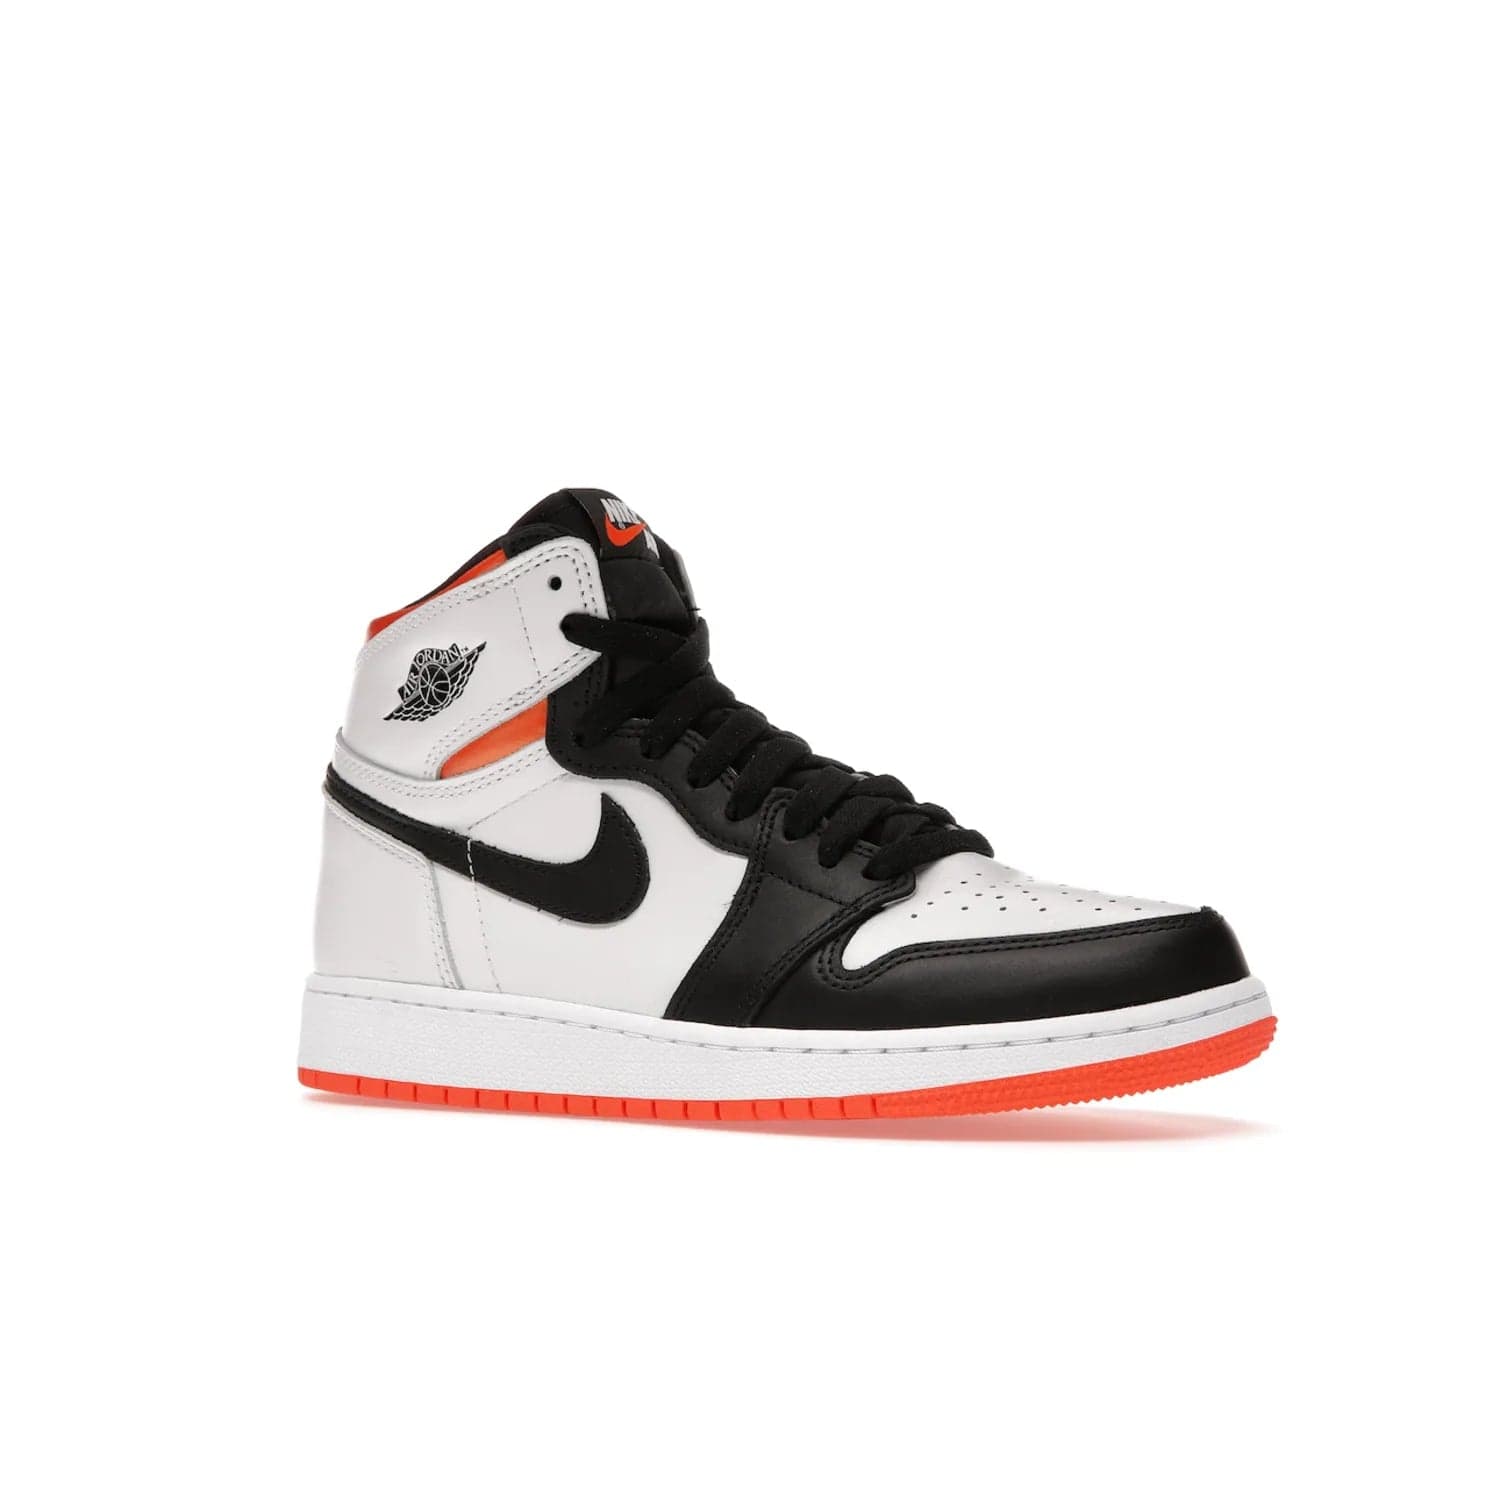 Jordan 1 High OG Electro Orange (GS) - Image 4 - Only at www.BallersClubKickz.com - The Air Jordan 1 High OG Electro Orange GS is the ideal shoe for kids on the go. Featuring white leather uppers, black overlays, and bright orange accents, it's sure to become a favorite. A great mix of classic style and vibrant colors, the shoe delivers air cushioning for comfort and hard orange rubber for grip. Release on July 17th, 2021. Get them a pair today.